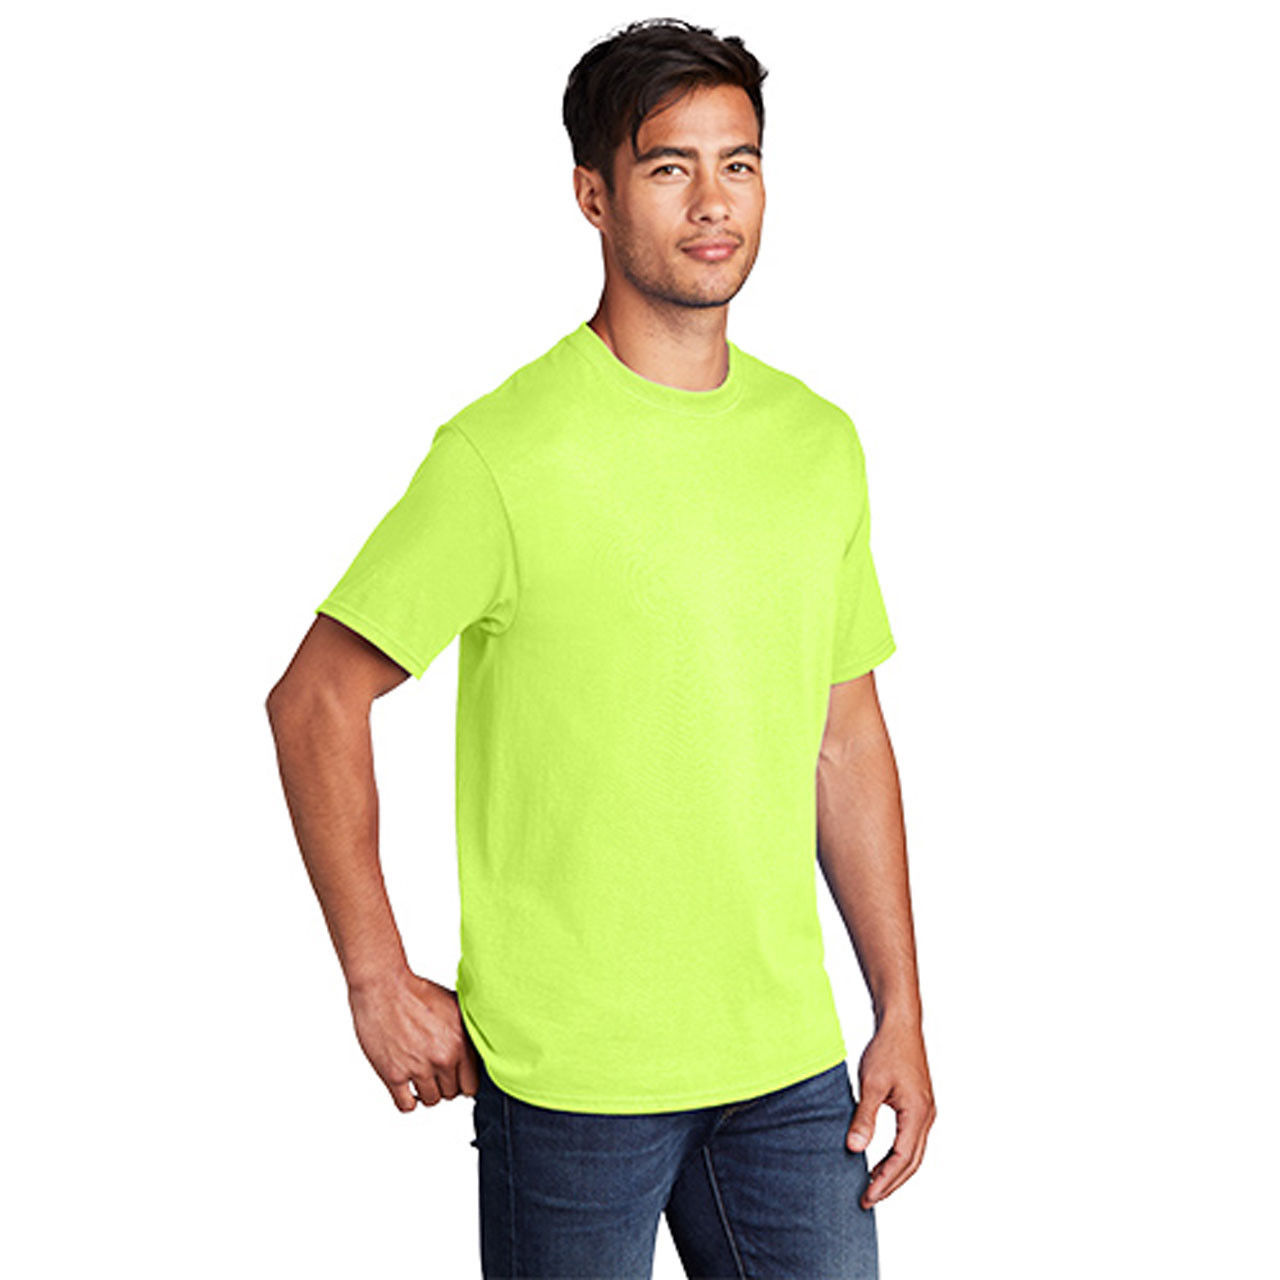 Is this comfortable and durable colored t shirts mens?